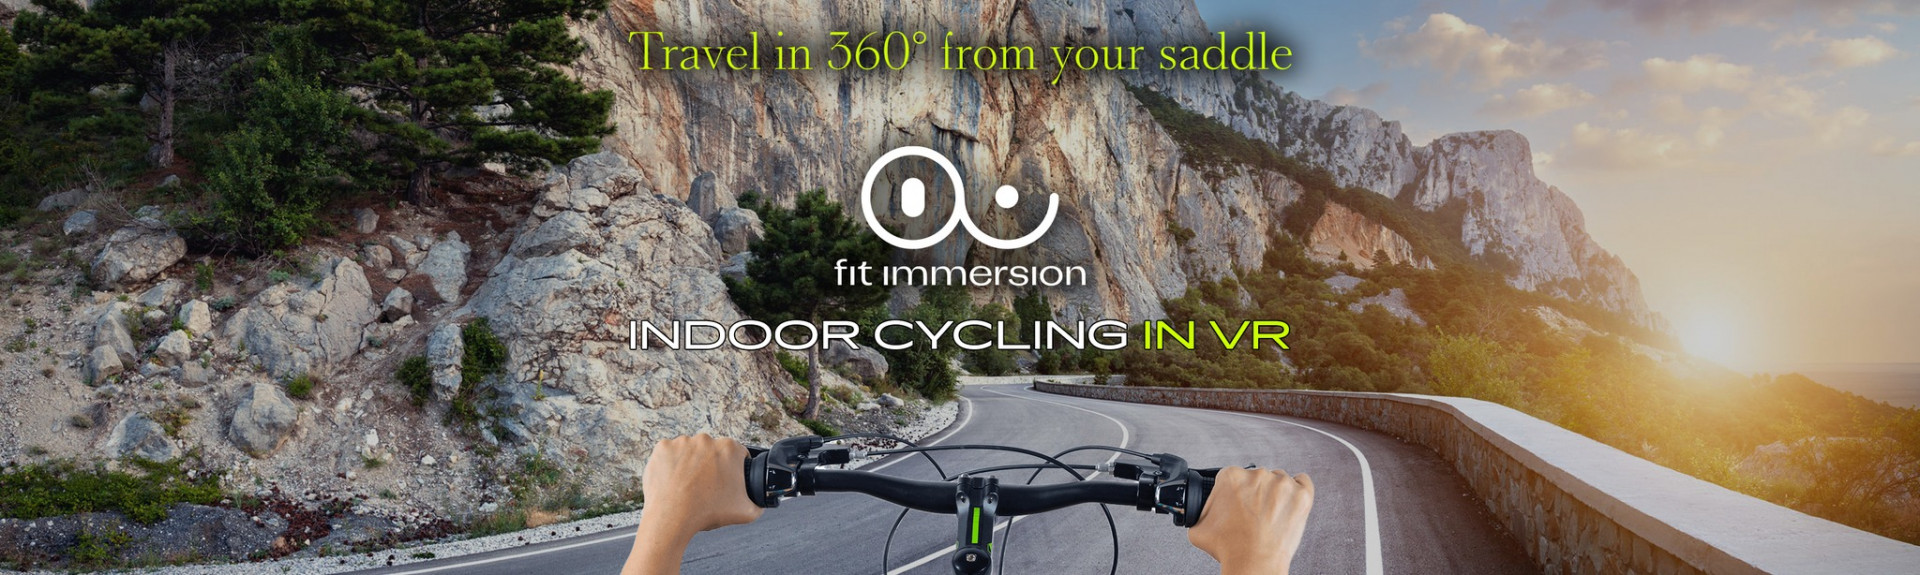 Fit Immersion